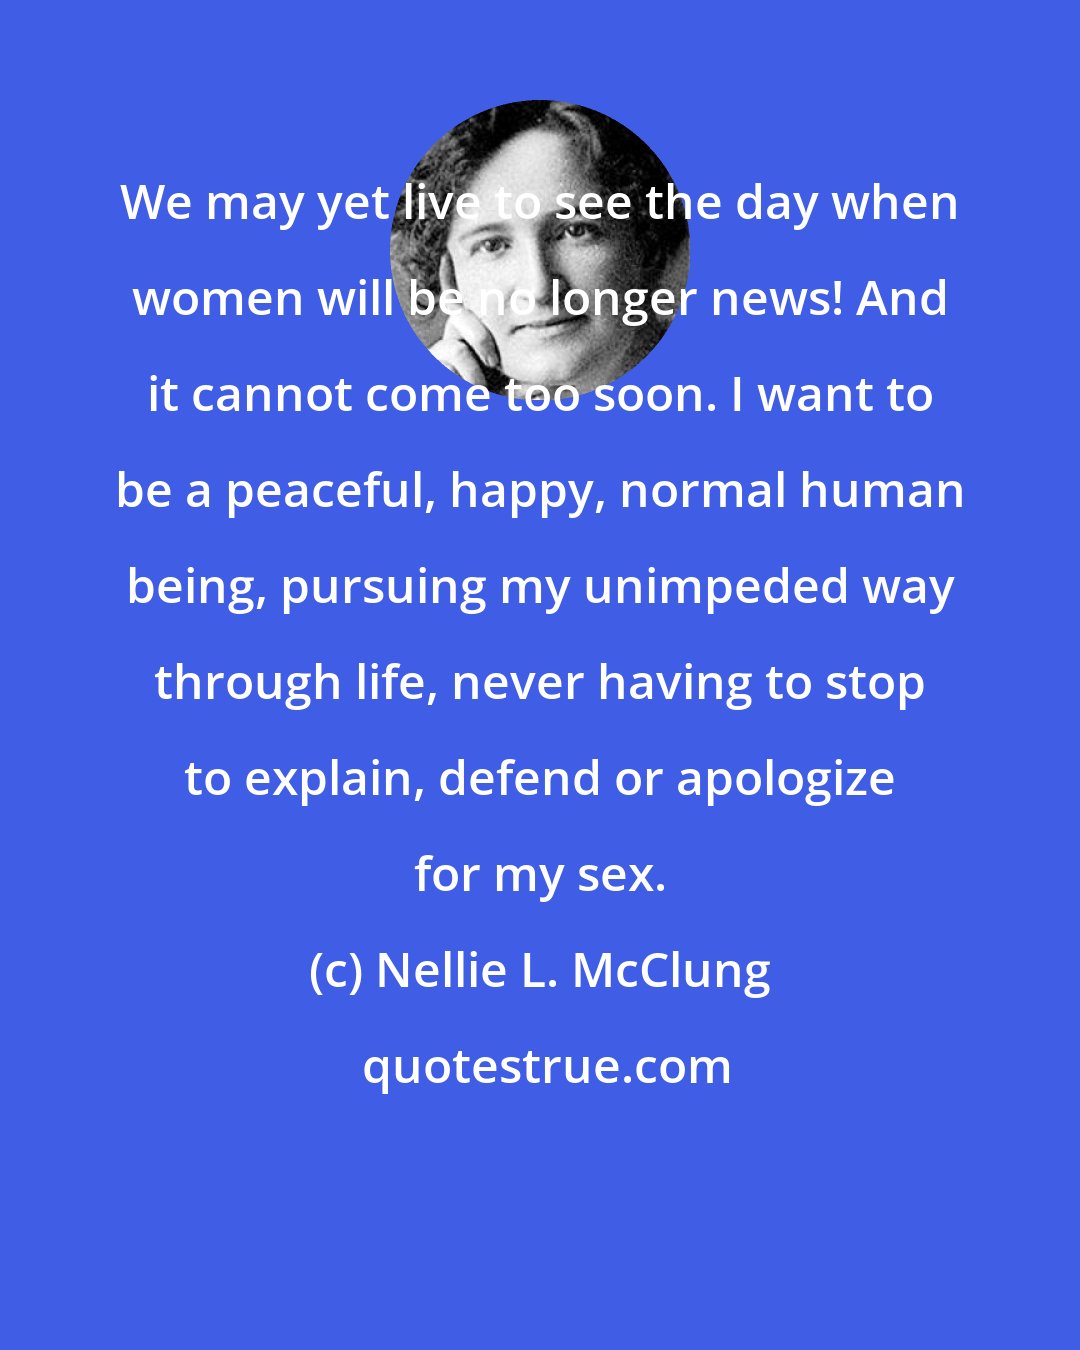 Nellie L. McClung: We may yet live to see the day when women will be no longer news! And it cannot come too soon. I want to be a peaceful, happy, normal human being, pursuing my unimpeded way through life, never having to stop to explain, defend or apologize for my sex.